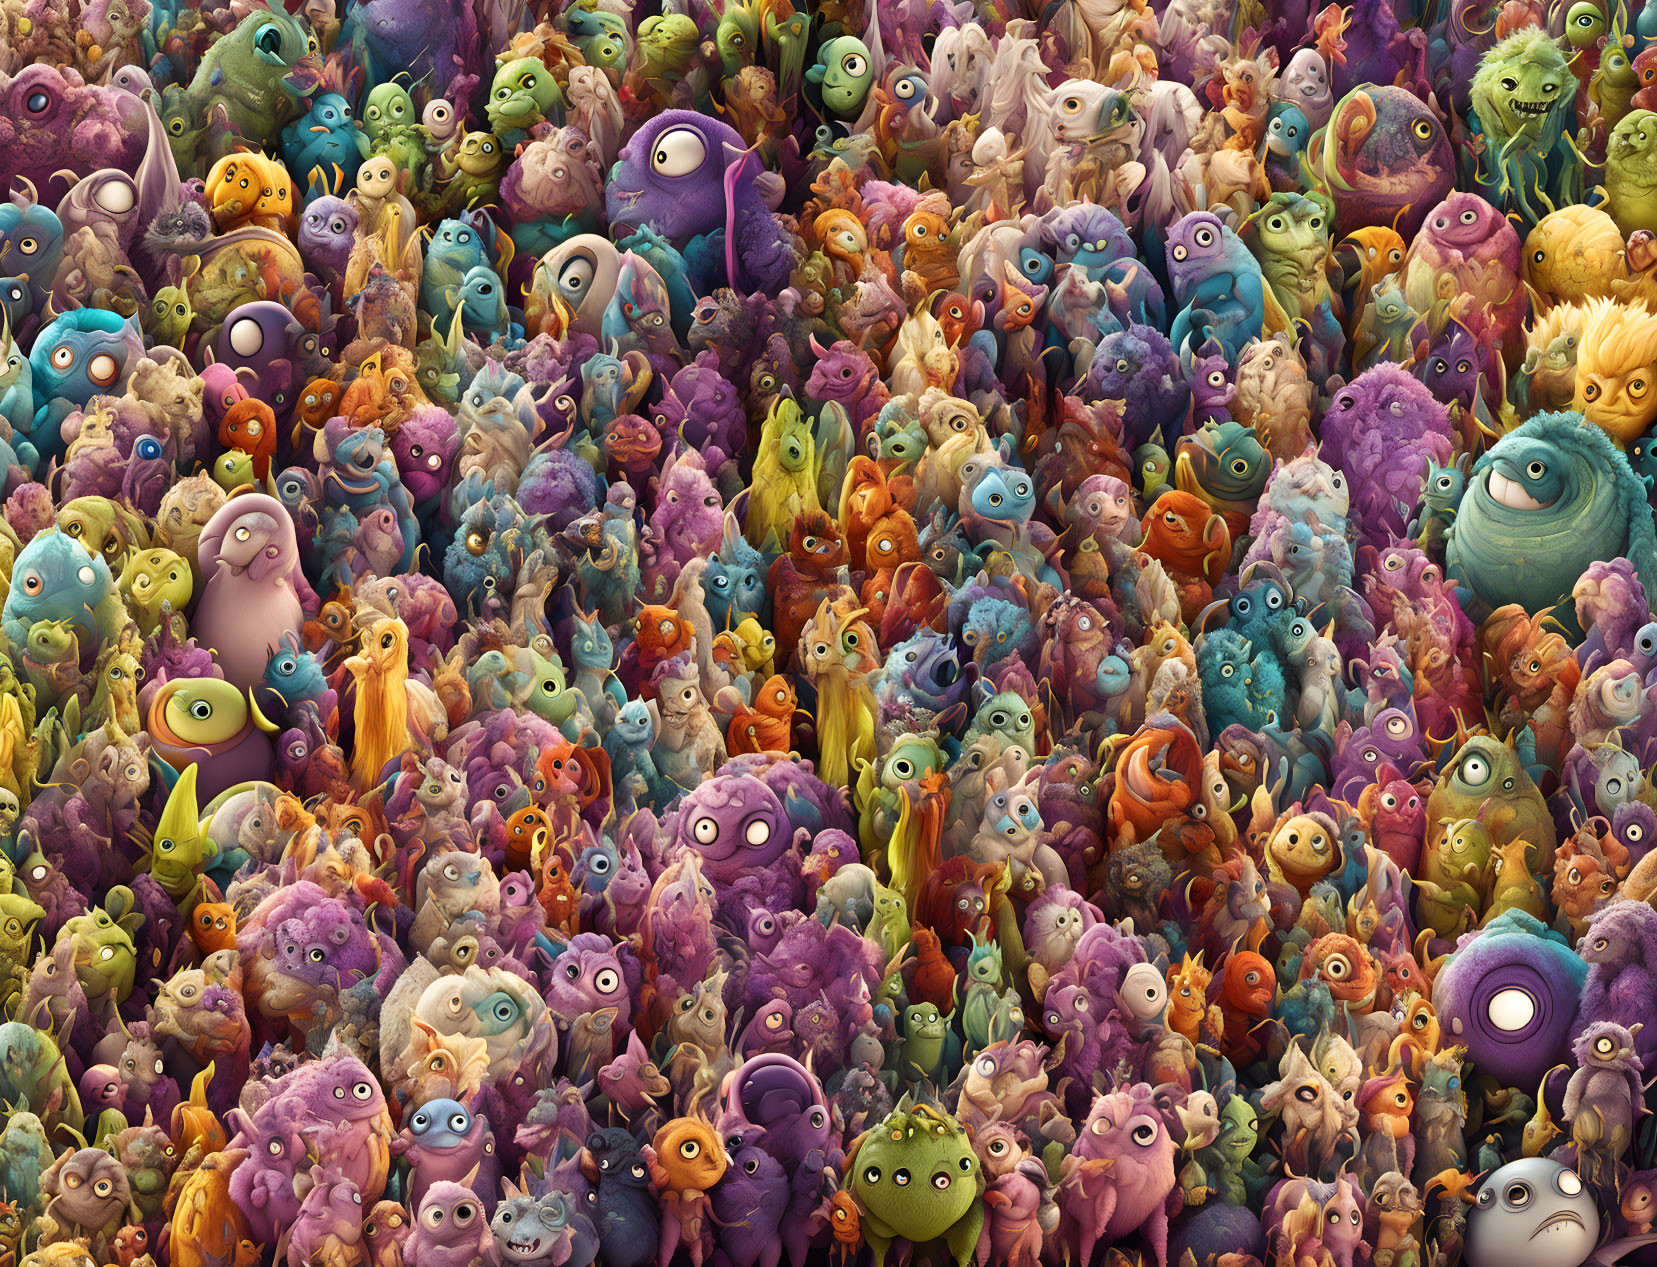 Colorful Cartoon Monsters with Various Expressions in Vibrant Crowd